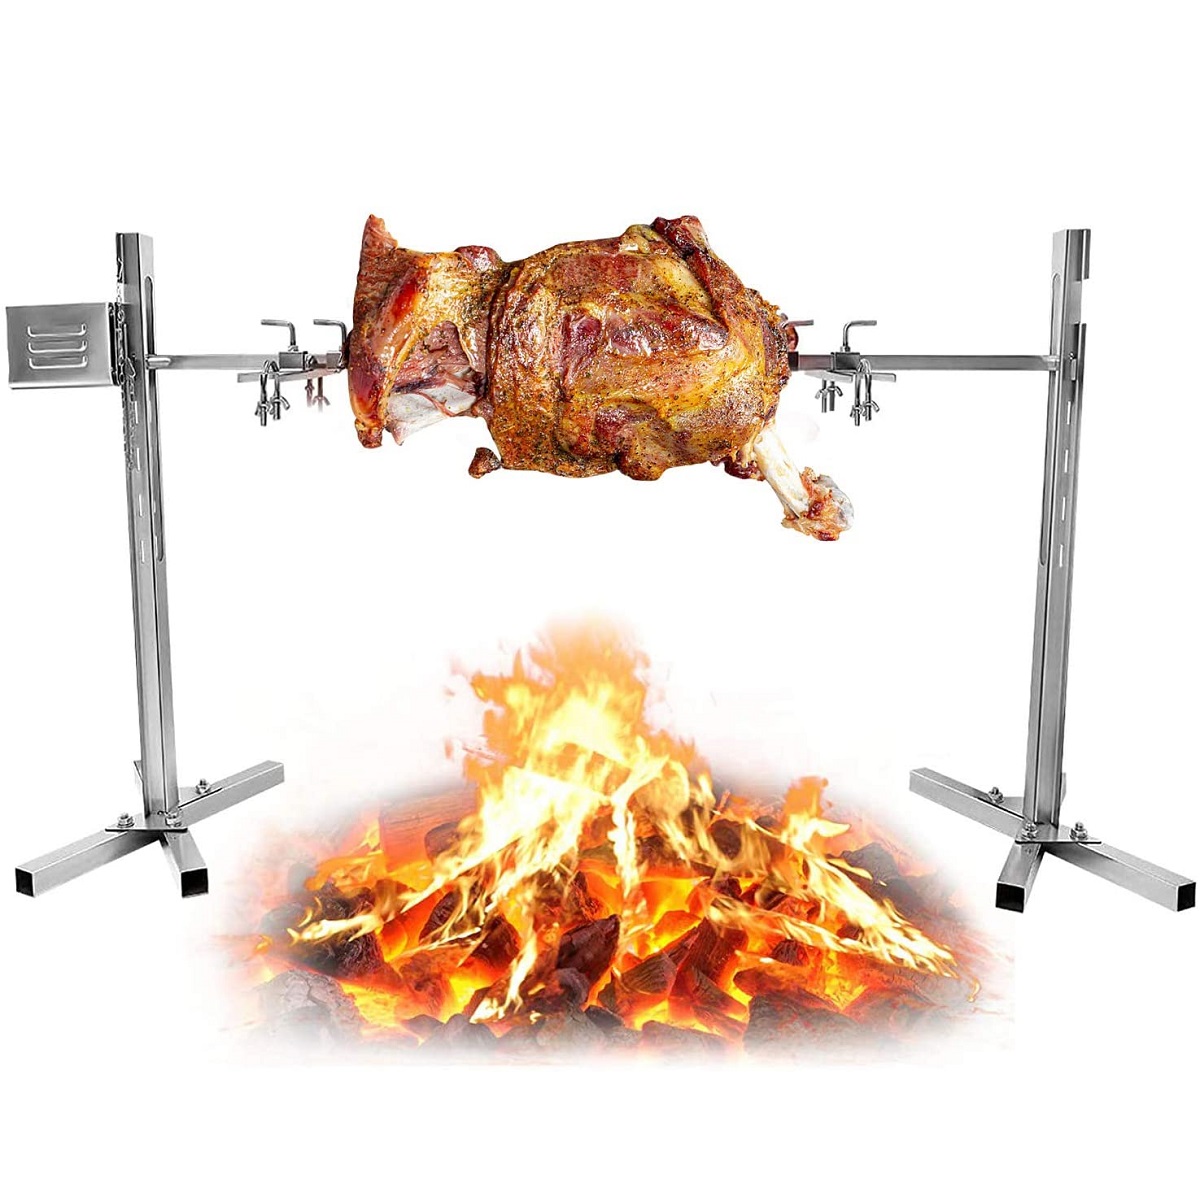 30KG Grill Rotisserie Spit Roaster Rod Charcoal Barbecue Roaster 15W Motor NEW!! 